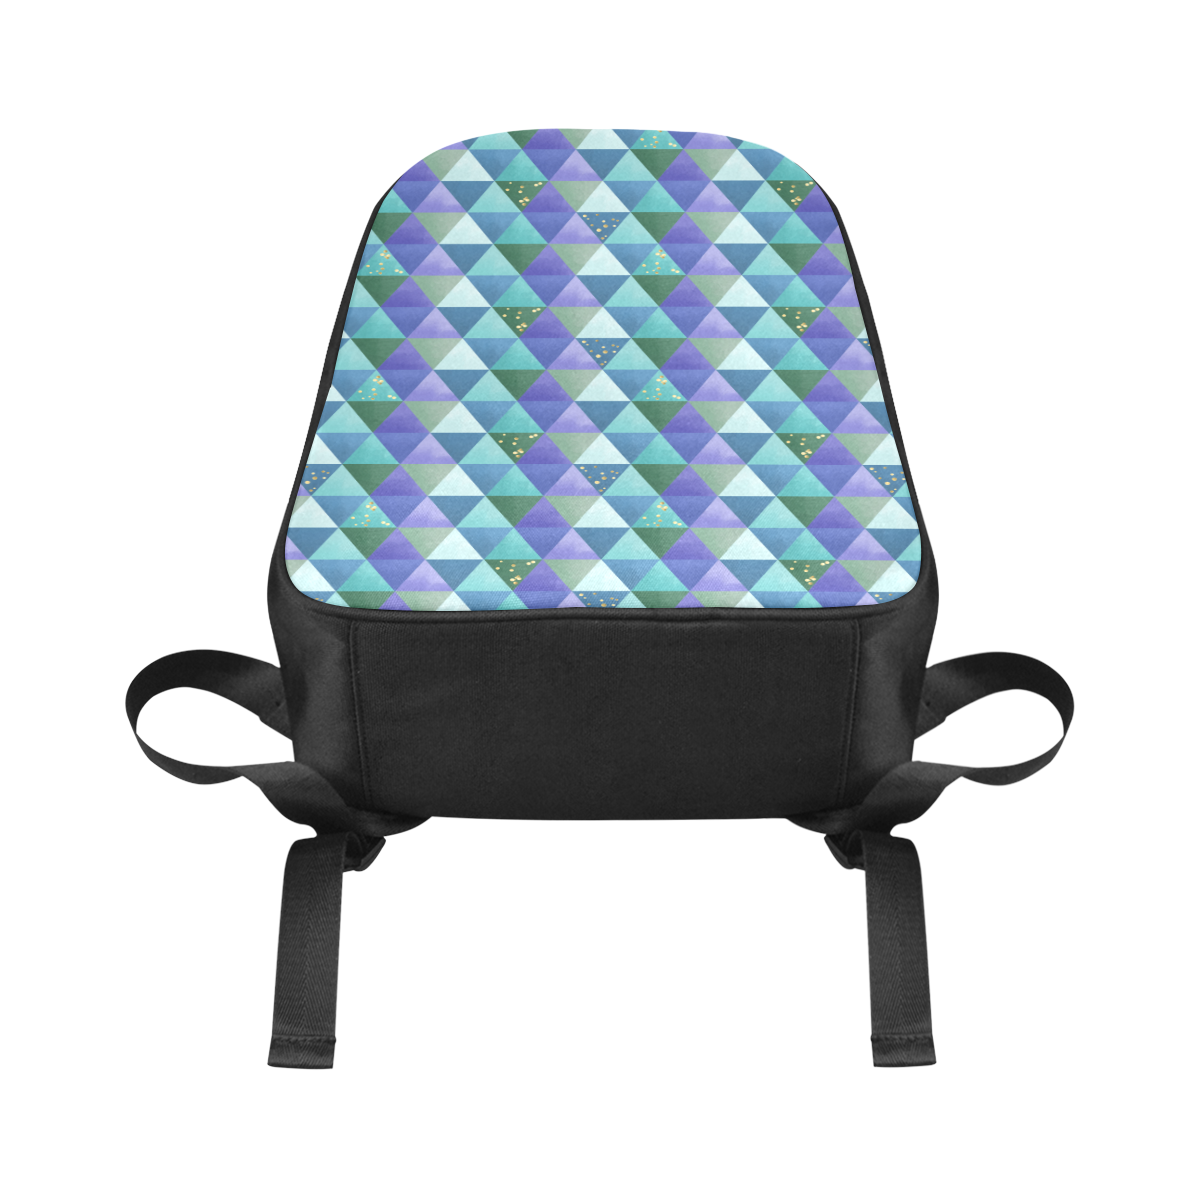 Triangle Pattern - Blue Violet Teal Green Fabric School Backpack (Model 1682) (Large)